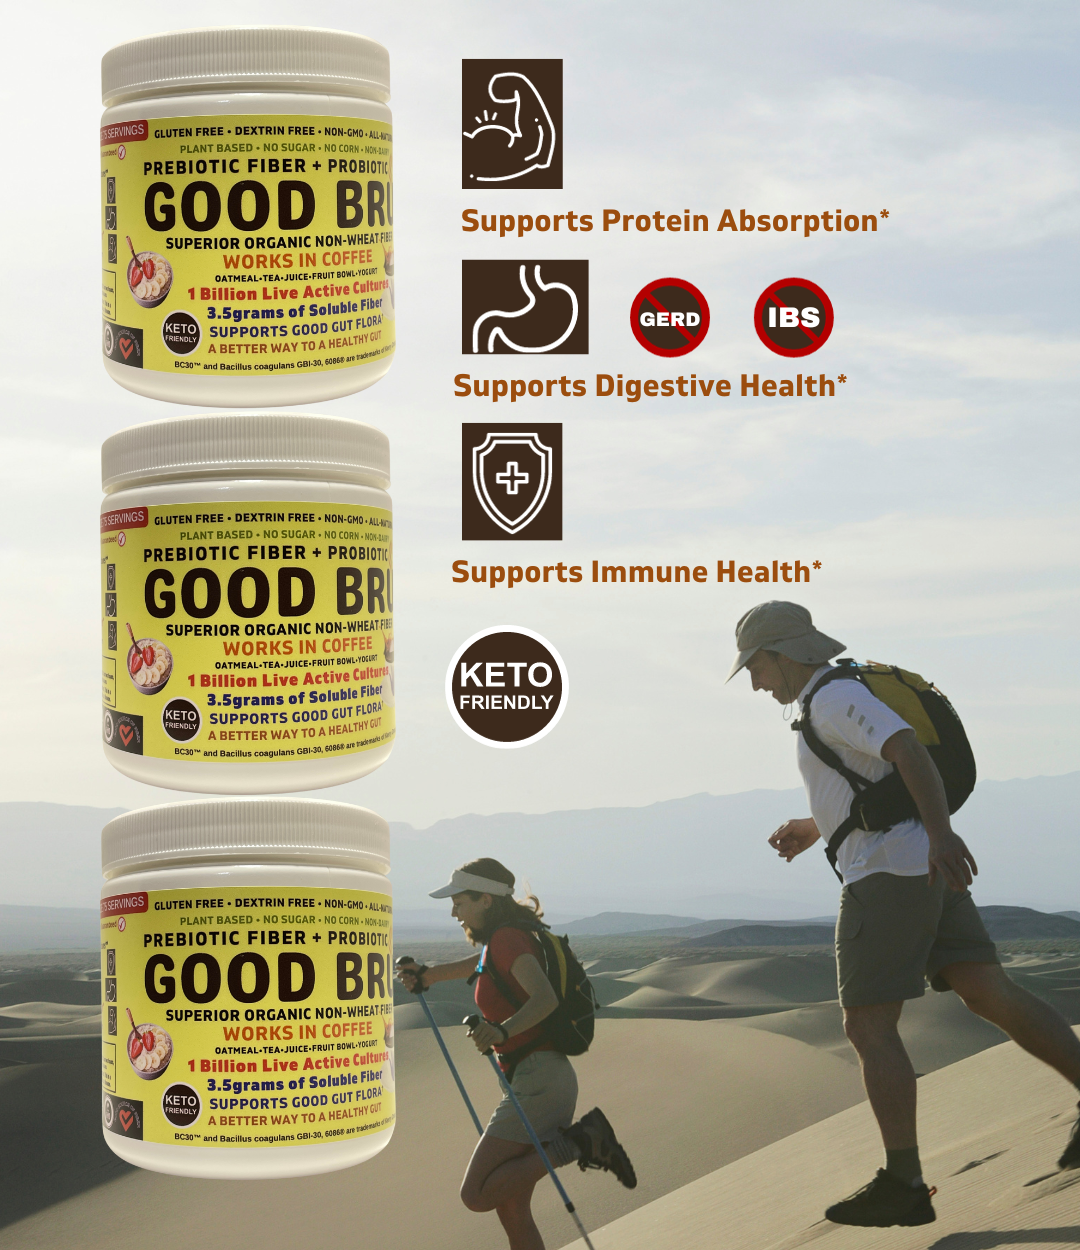 Good Bru organic prebiotic plus probiotic single pack. A healthy gut is important to overall health. Keto friendly all natural soluble fiber that goes great in coffee. 1 Billlion live active cultures that supports digestive health, immune function, protein utilization and fight IBS, GERD.